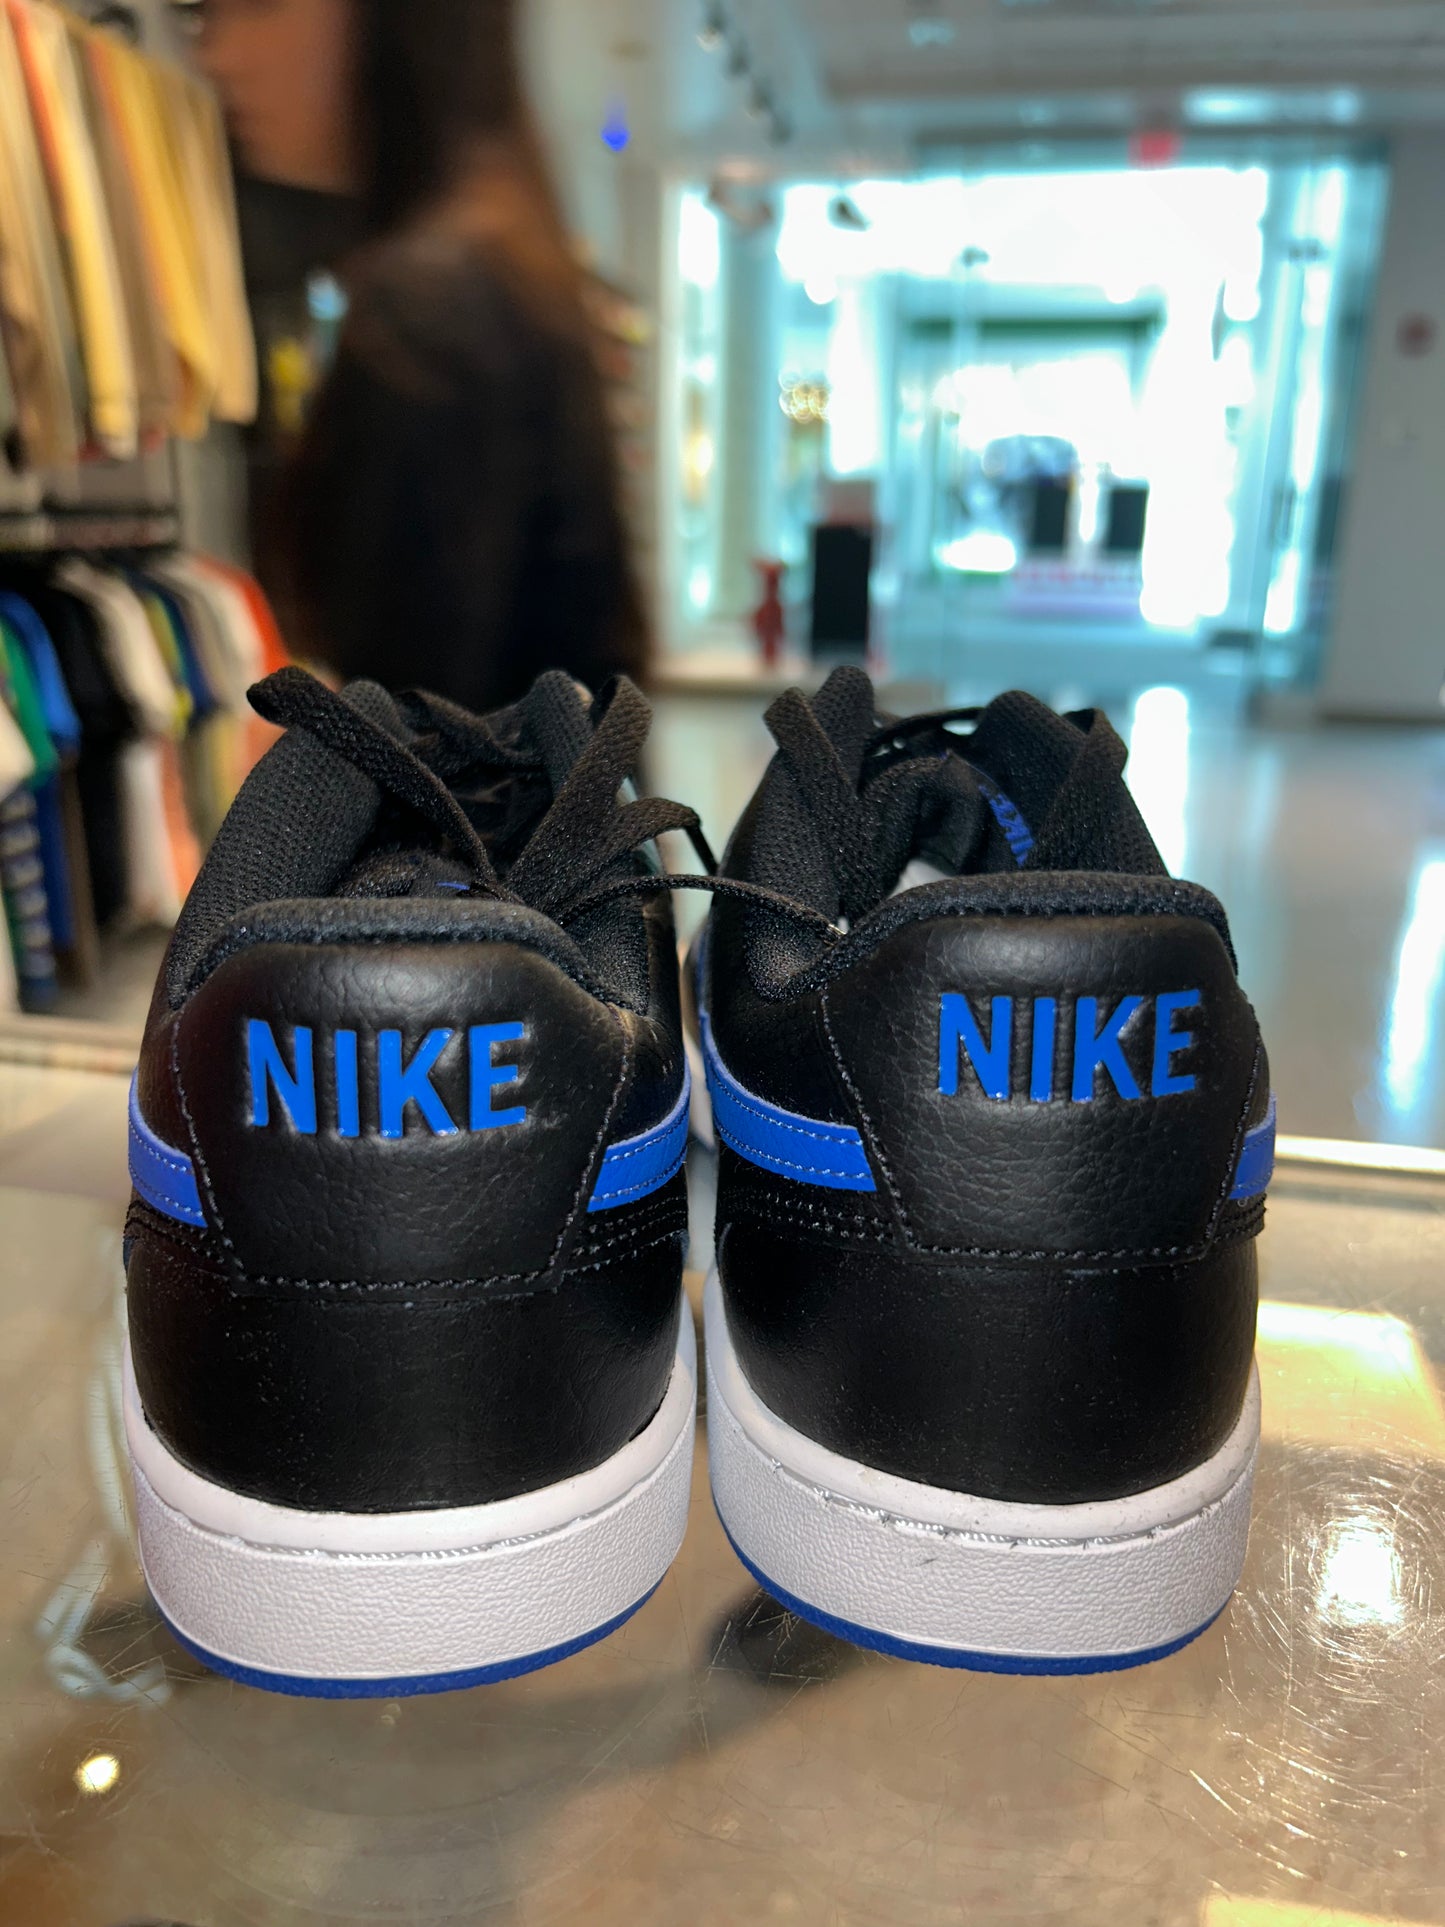 Size 10.5 Court Vision Low “Royal” Brand New (Mall)